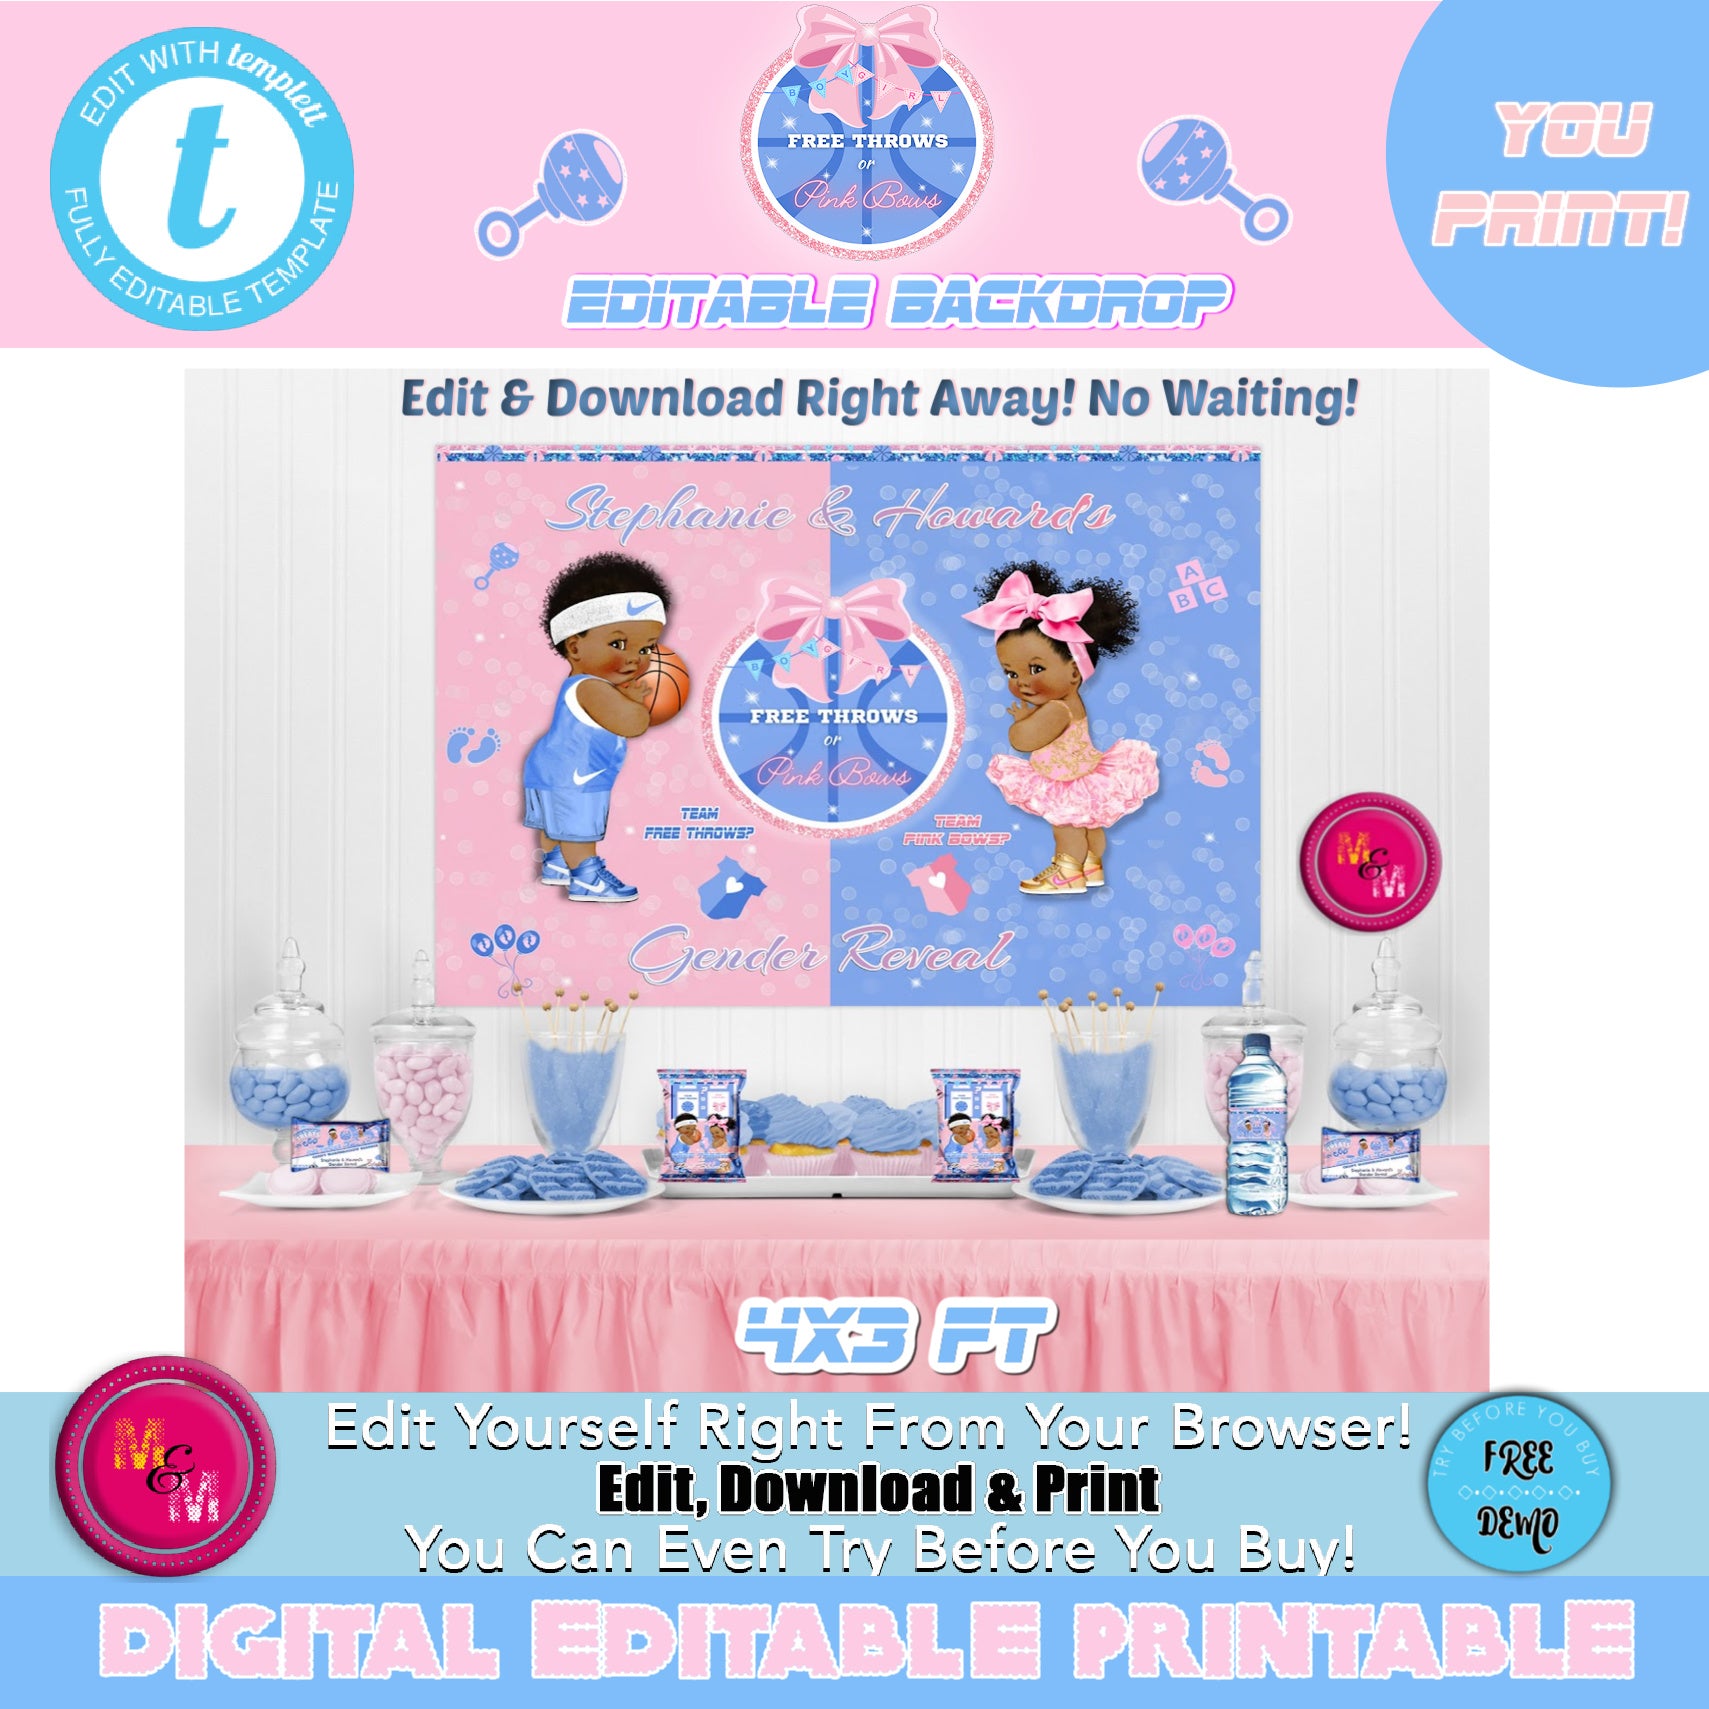 Allenjoy Gender Reveal Free Throws or Pink Bows Backdrop